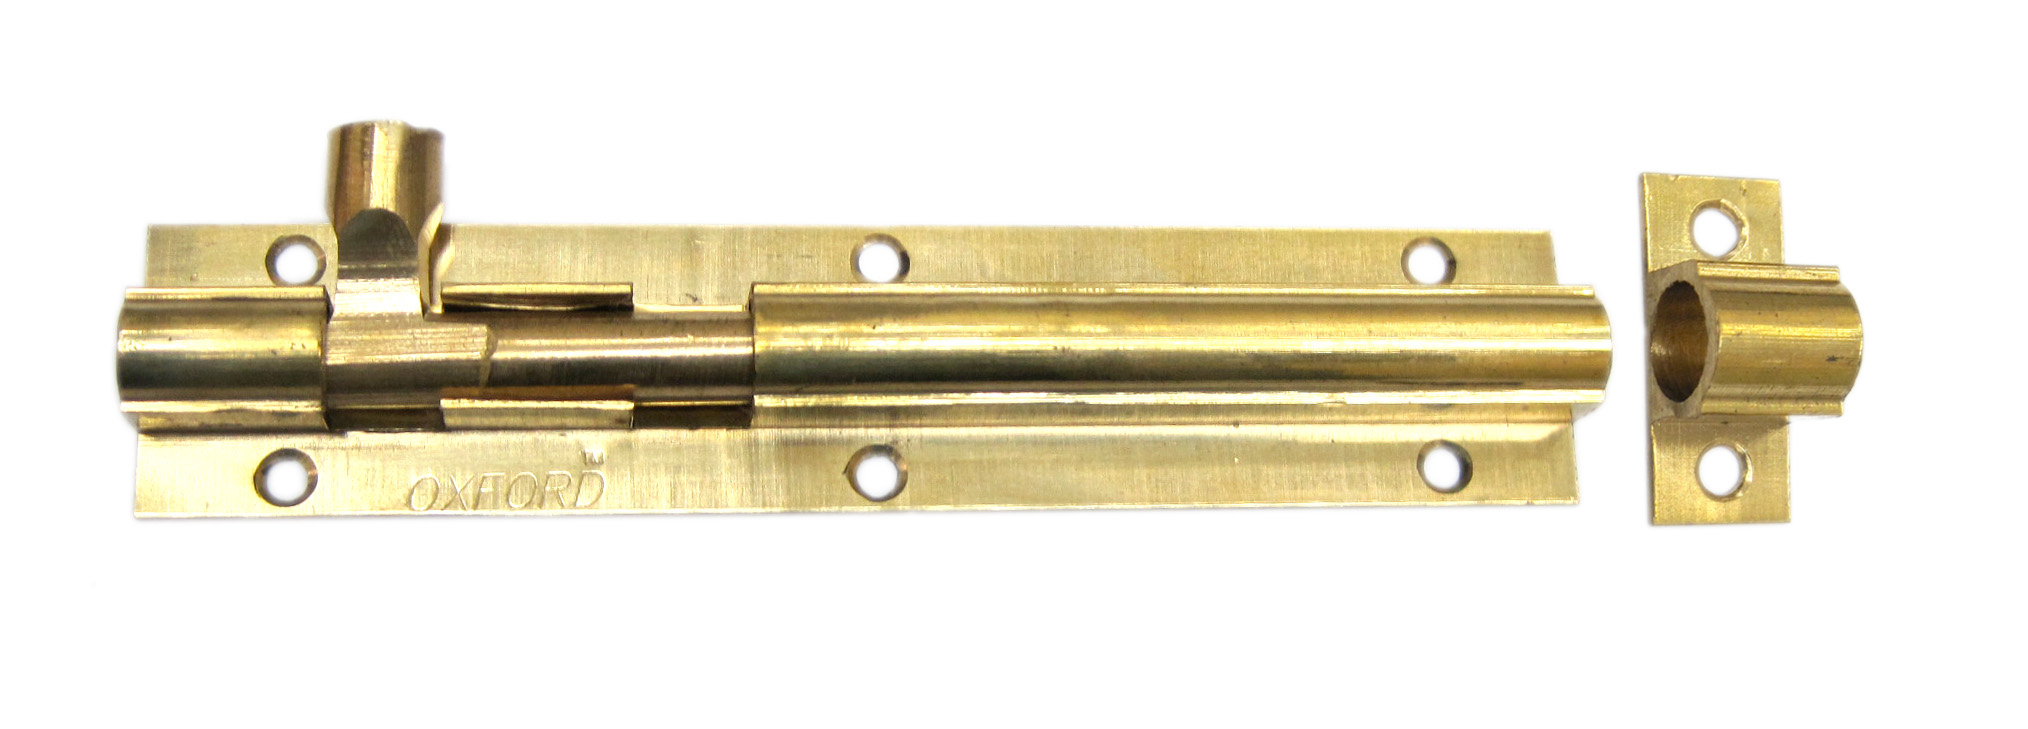 BRASS TOWER BOLT 3/8X 6 In CO01